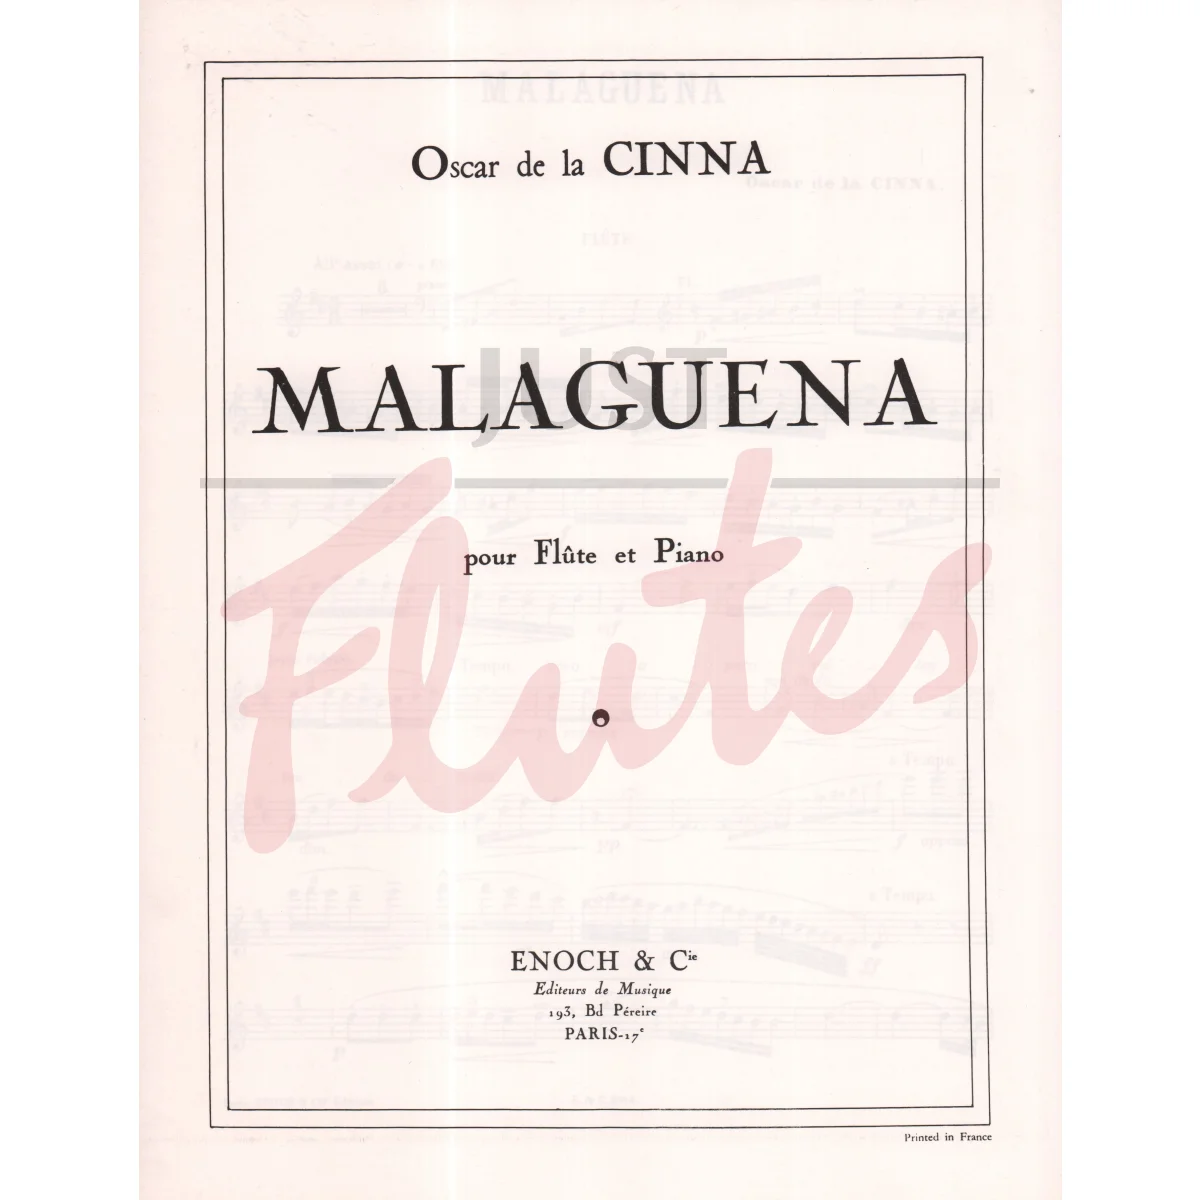 Malaguena for Flute and Piano